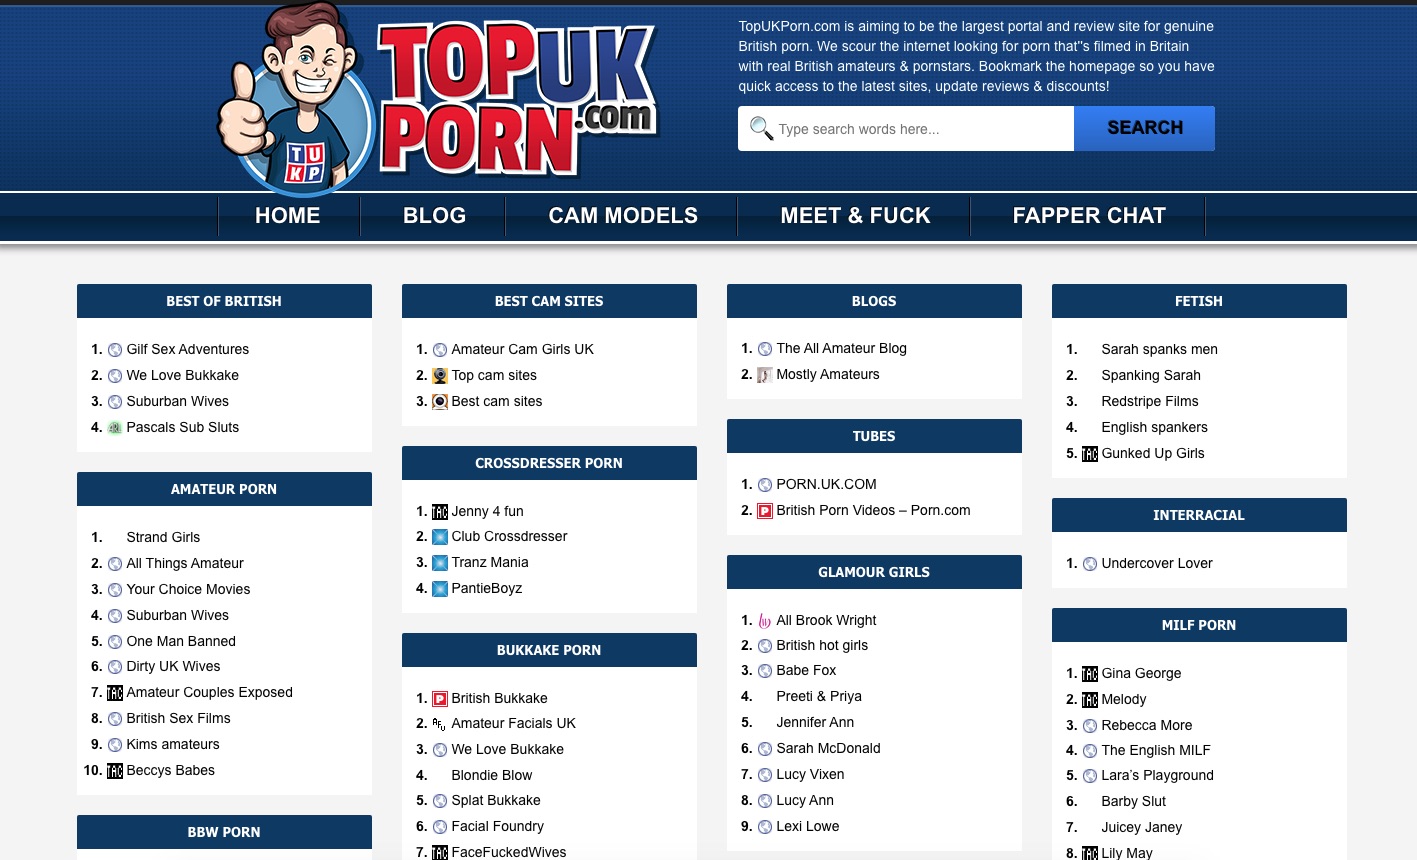 Find the best British porn sites at TopUKPorn image